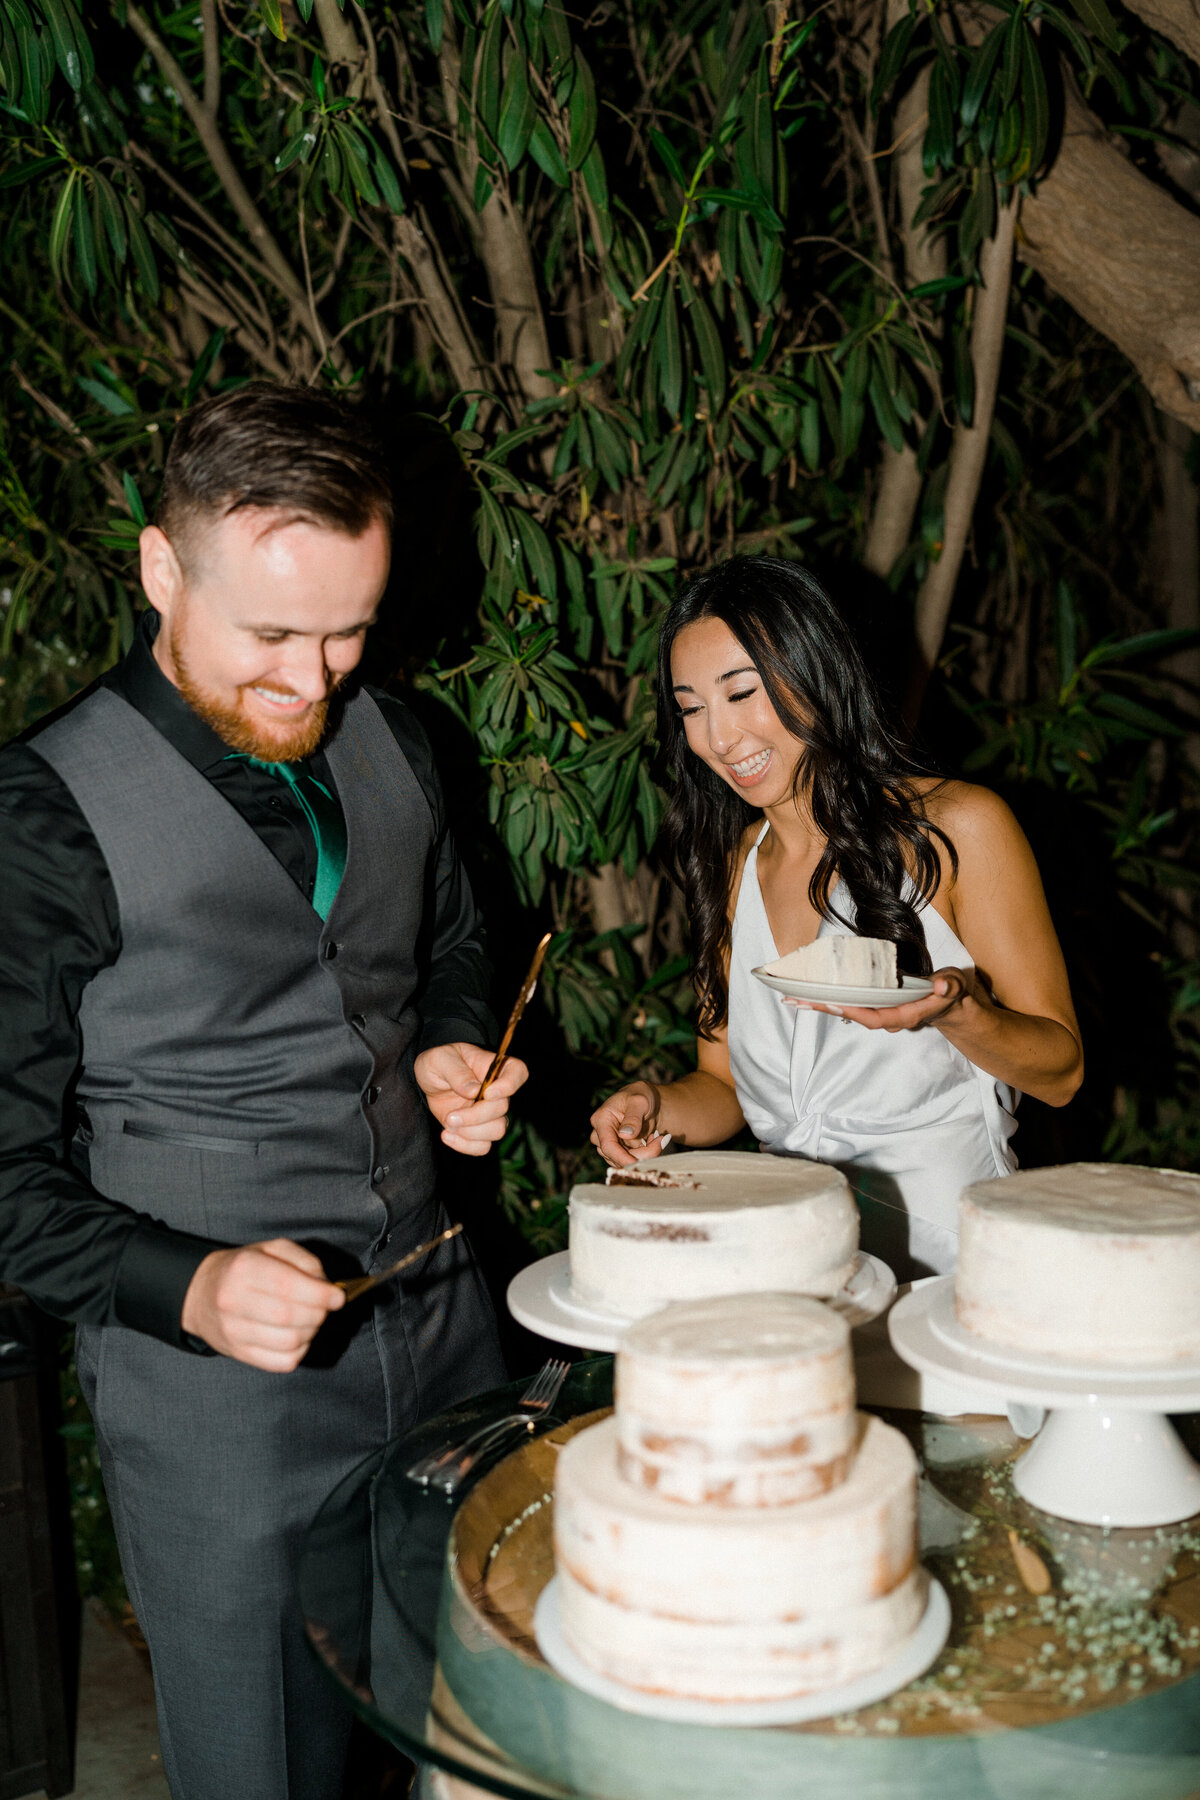 mride and groom cutting the white wedding cake while laughing together